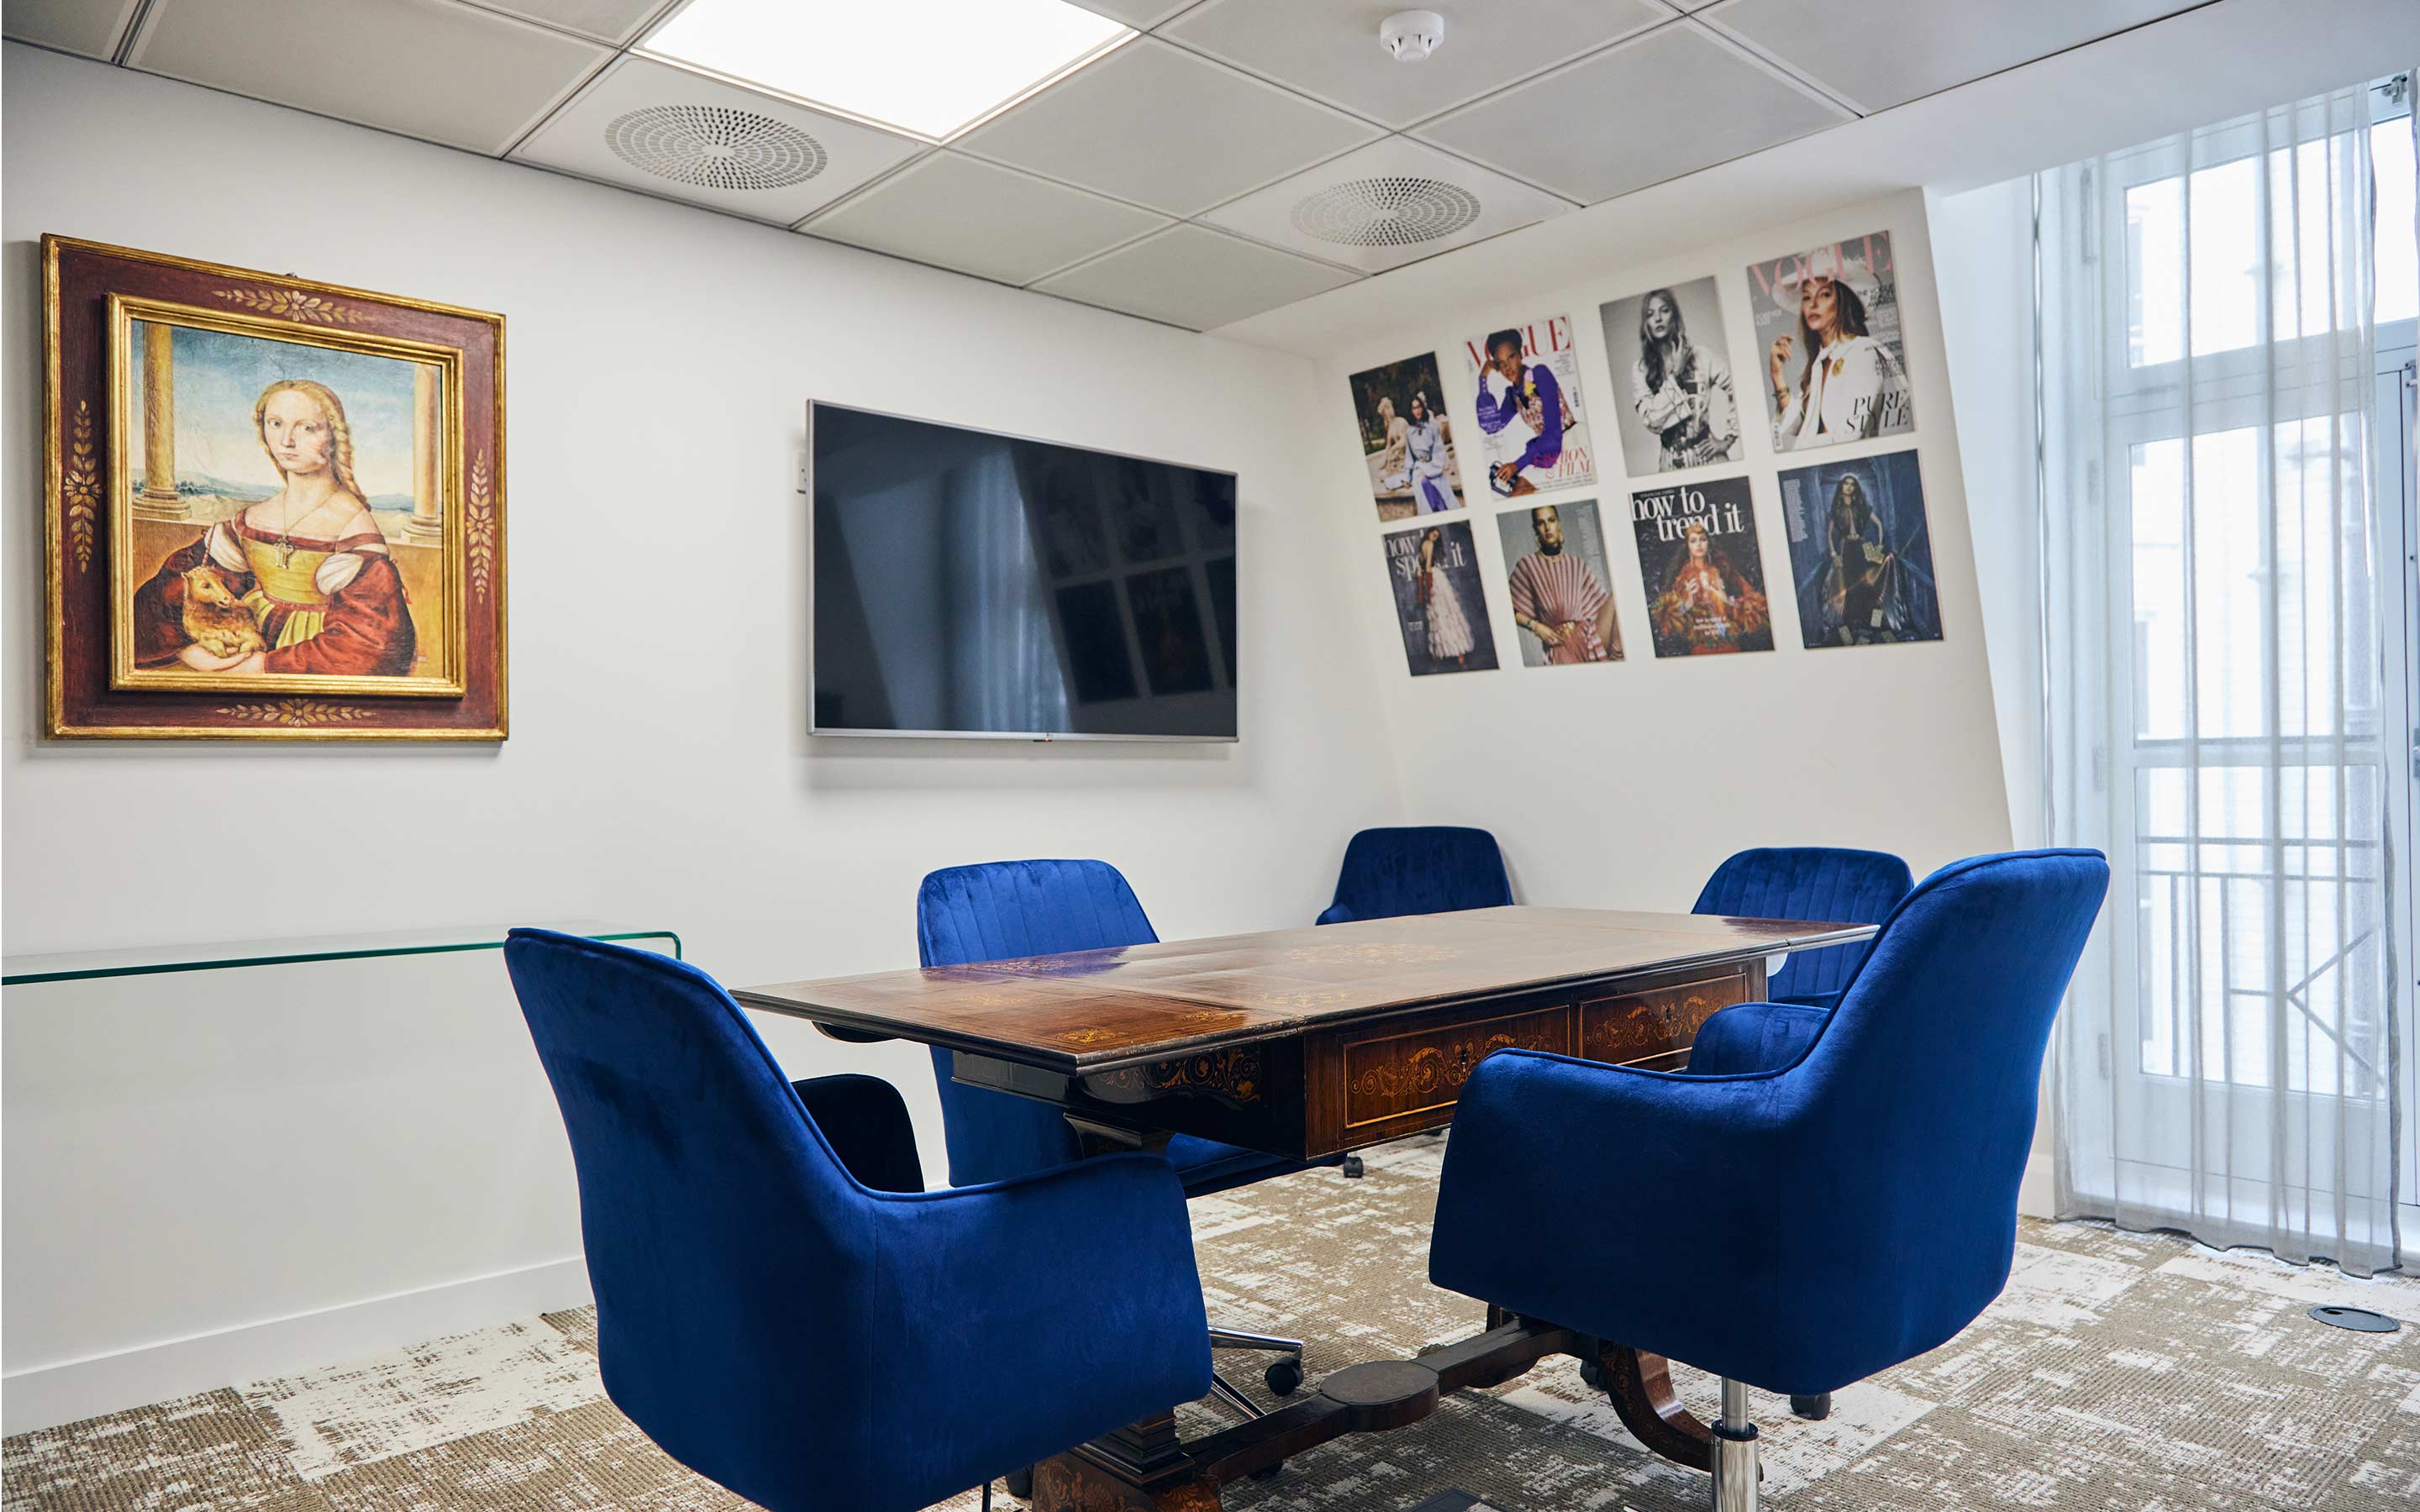 The image shows a bespoke office meeting room with artwork, and magazine issues hung on the walls, and plush blue meeting chairs